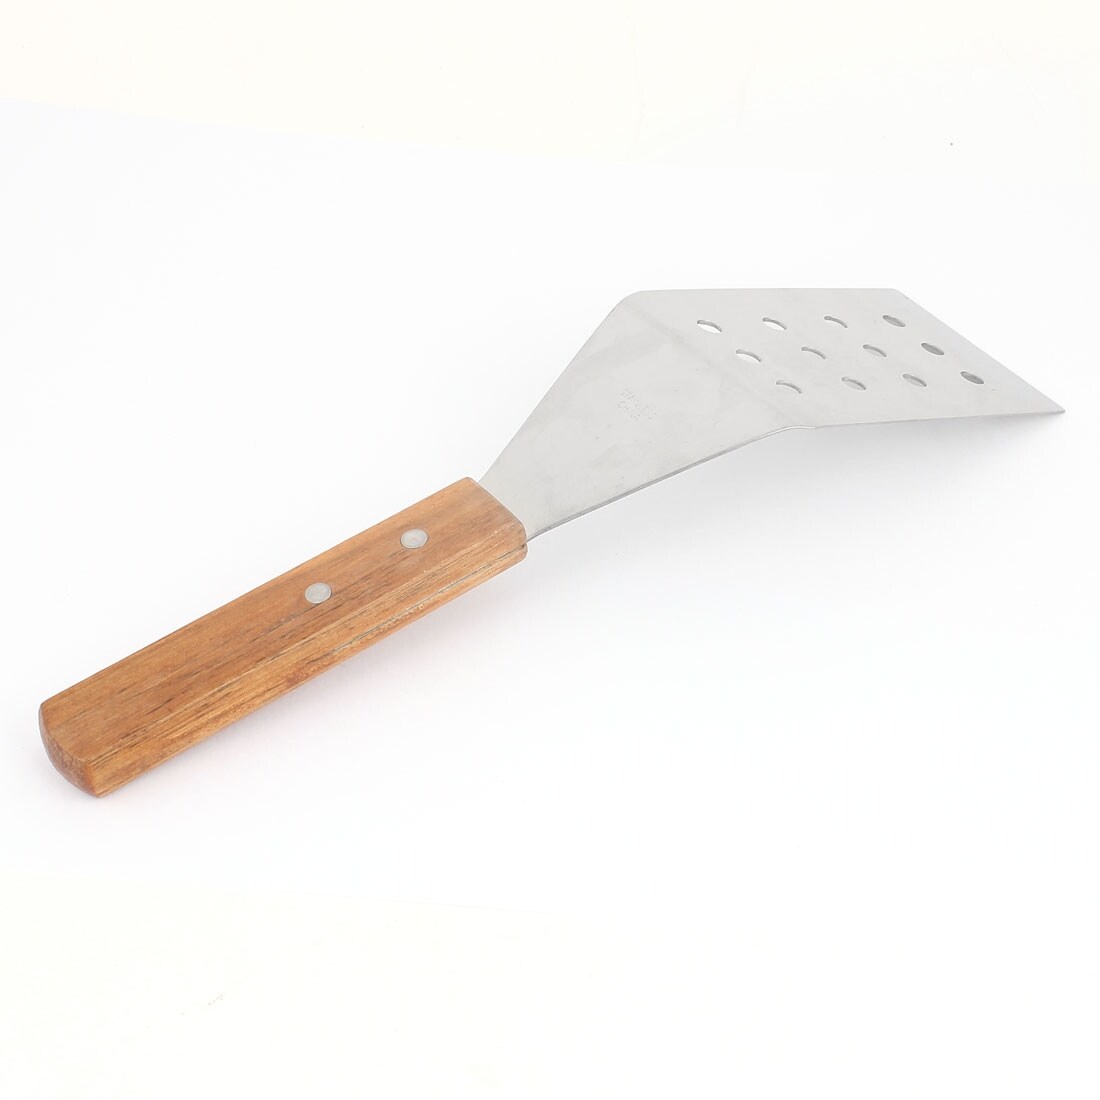 https://ak1.ostkcdn.com/images/products/is/images/direct/e1366c5e37bb307e96ded18ea17a6895ead994b7/Unique-Bargains-Kitchen-Tool-Rectangle-Perforated-Blade-Wooden-Handle-Food-Turner-Scraper.jpg